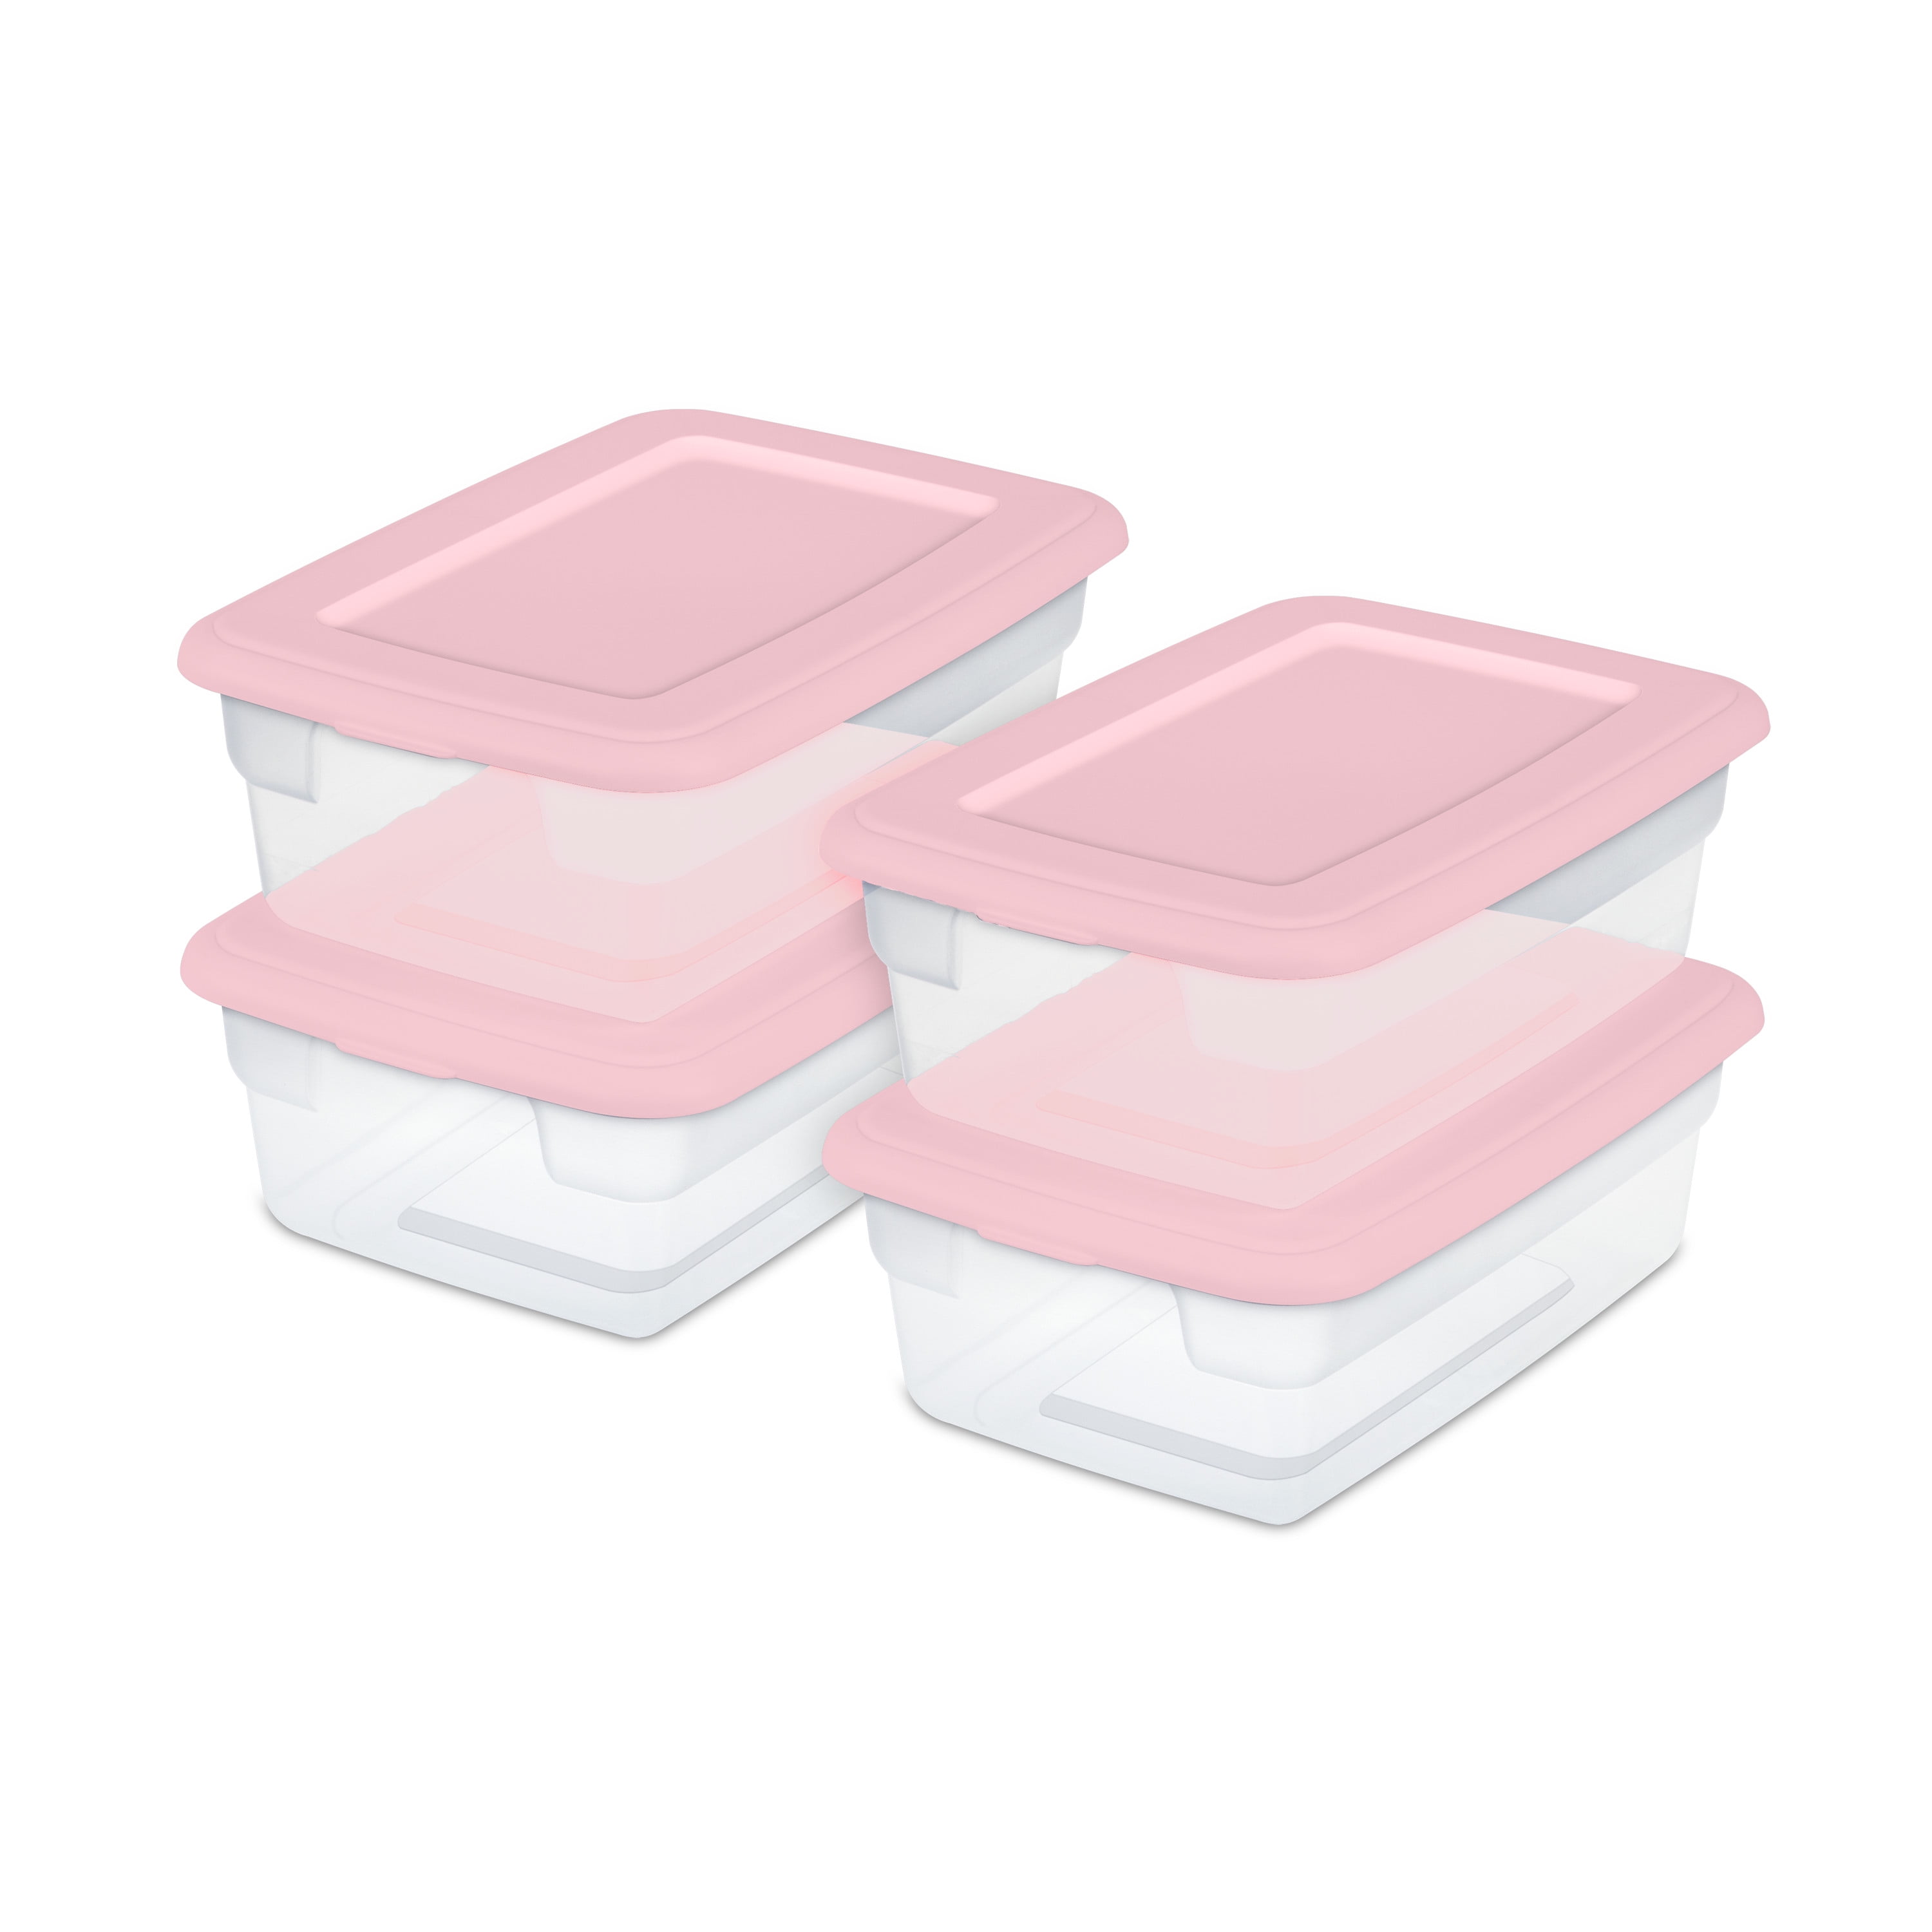 Plastic Food Storage Pink Container, Capacity: 1100 ml, Weight: 400 Gm